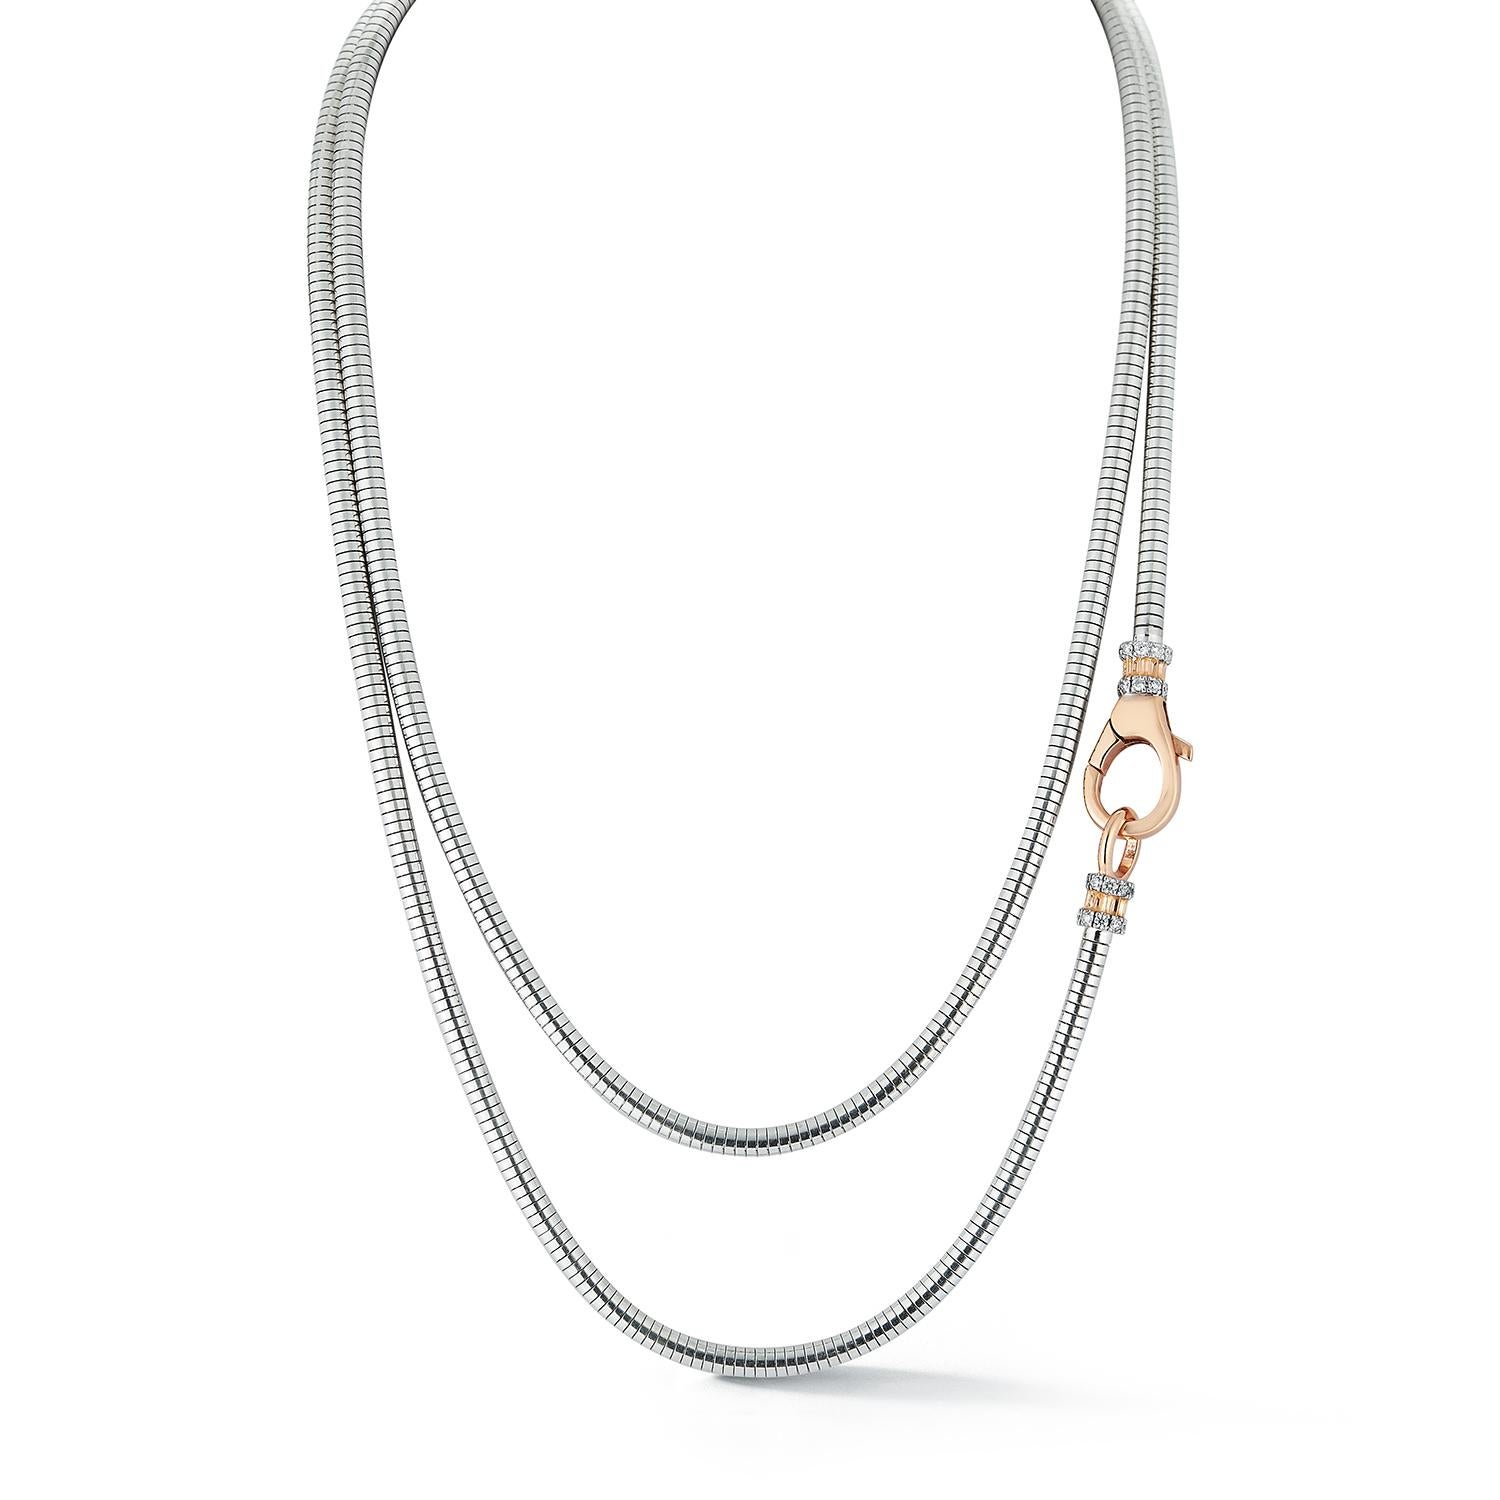 Walters Faith's Clive Collection 18K Rose Gold and Diamond Clasp on Sterling Silver Boa Chain. .43 Diamond Carat Weight. Chain measures 40